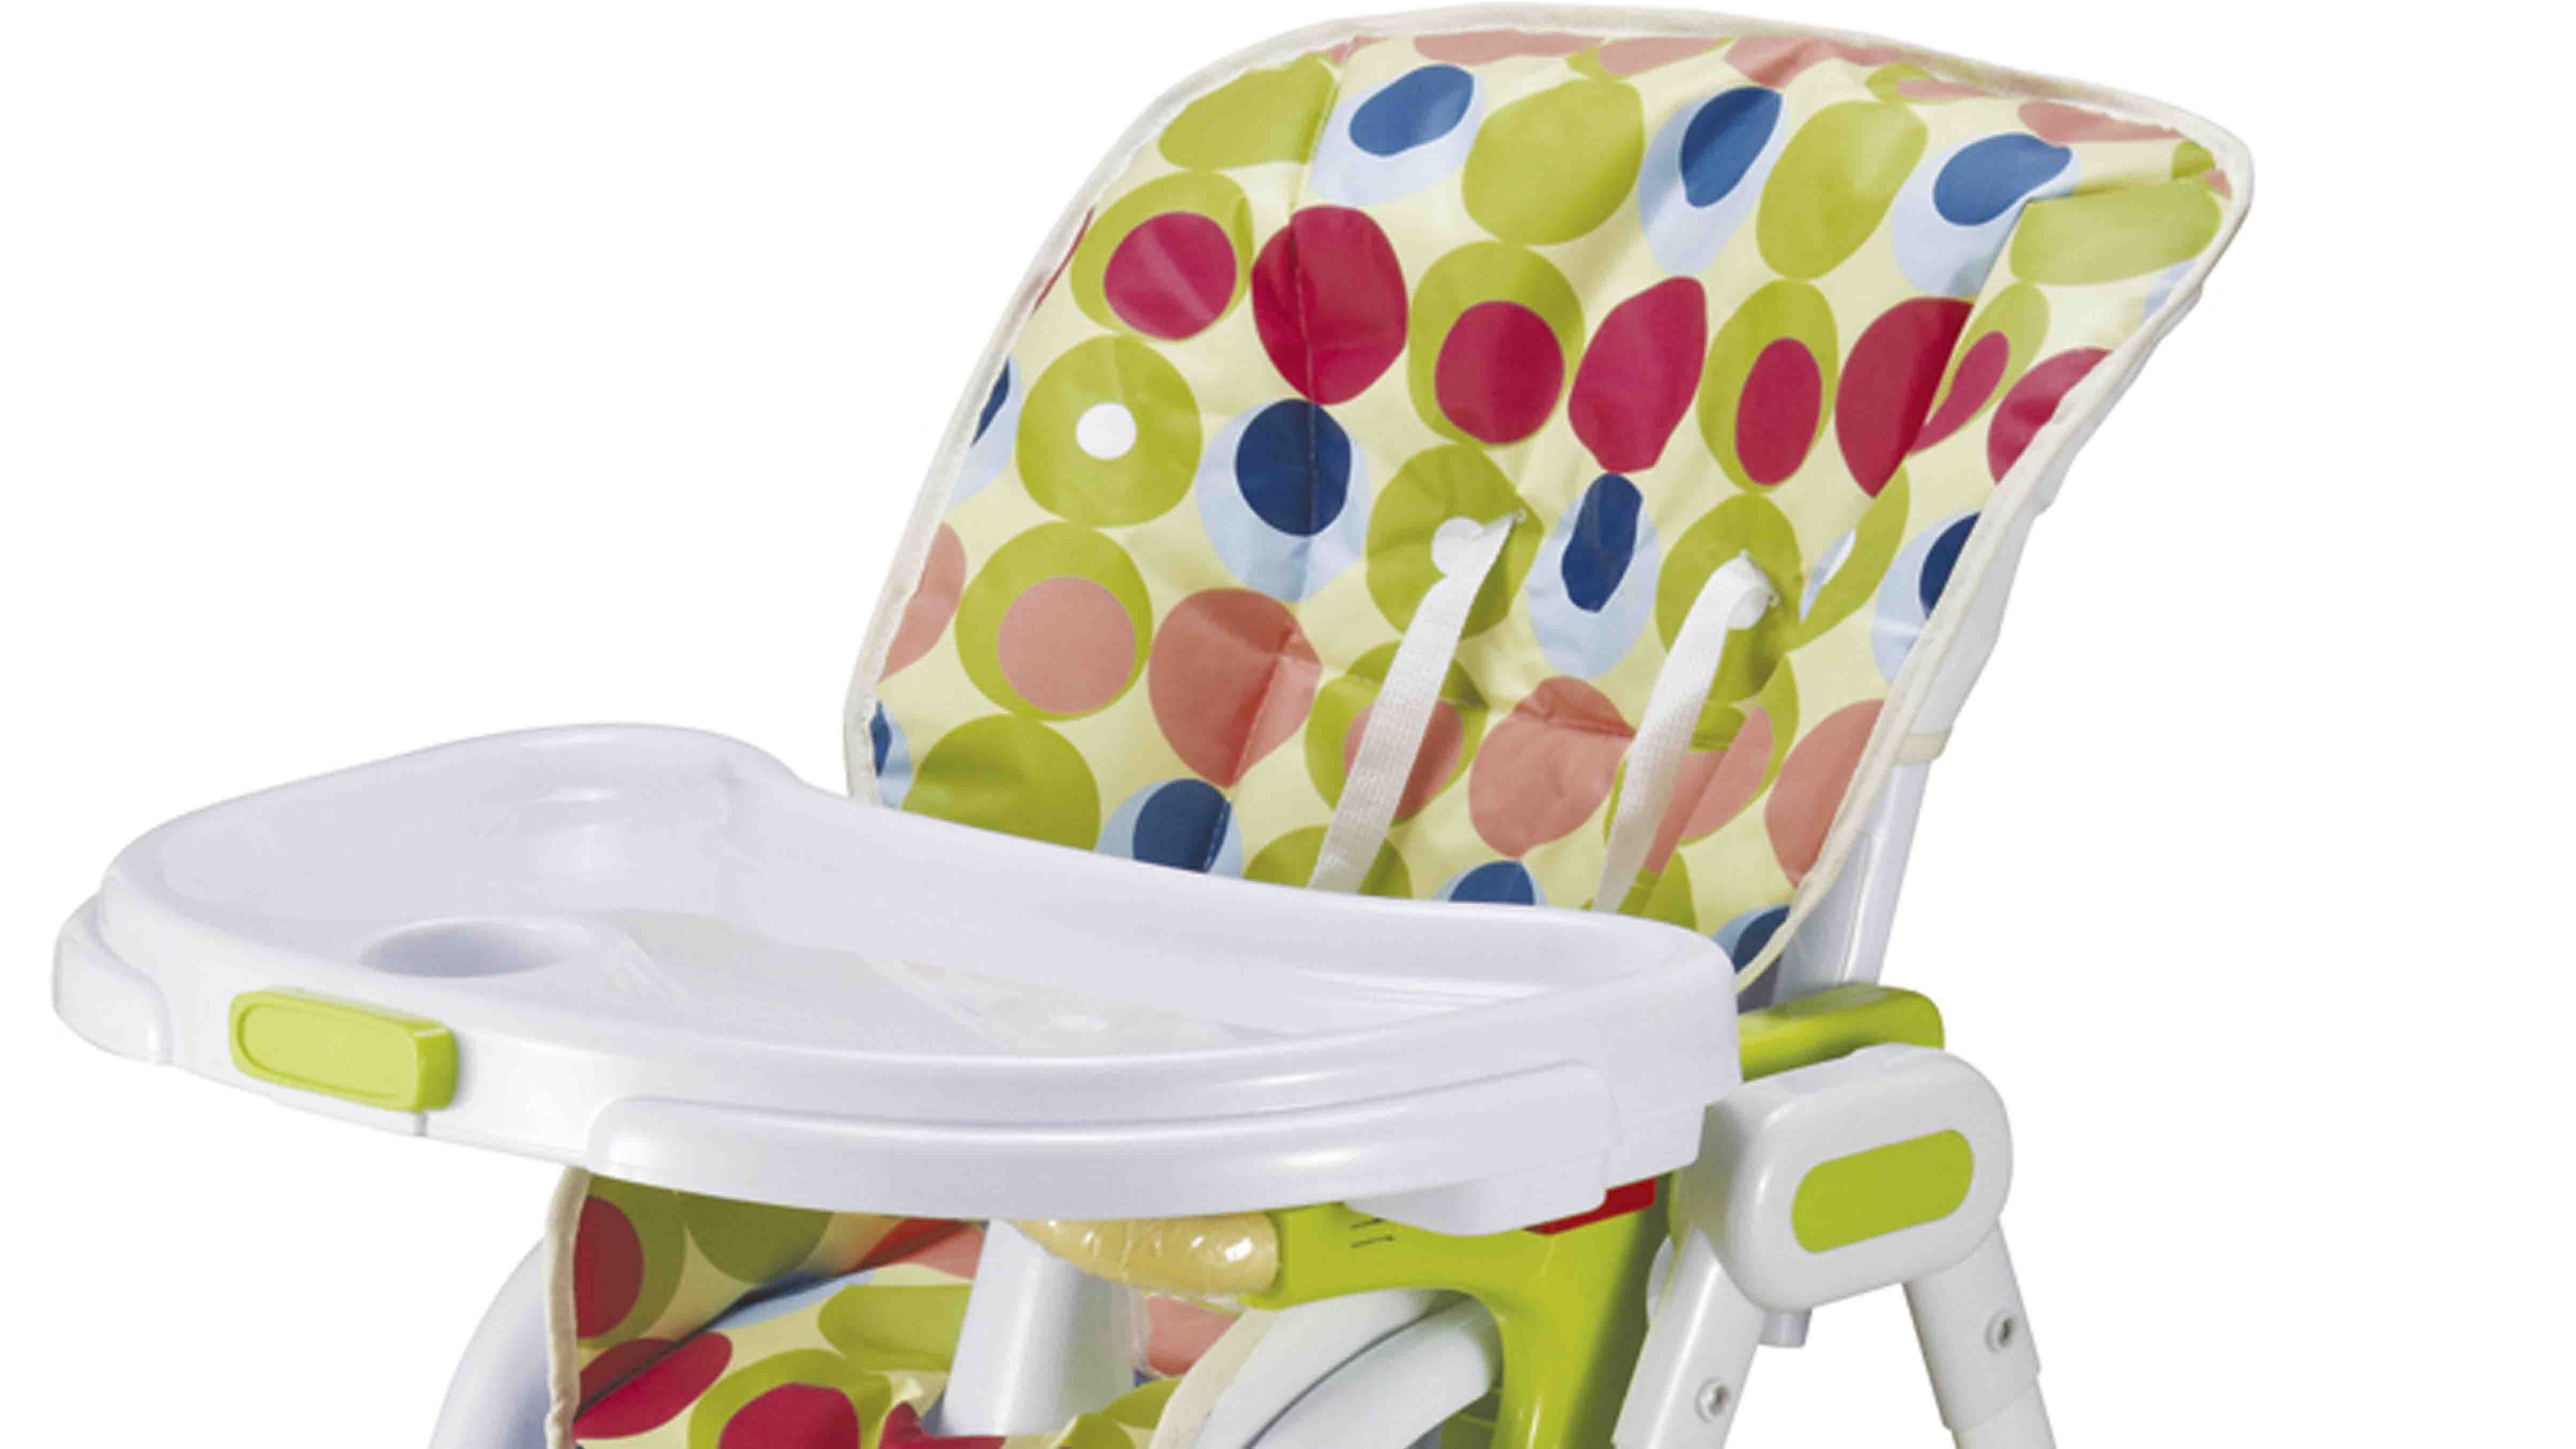 Aoqi special adjustable high chair for babies series for infant